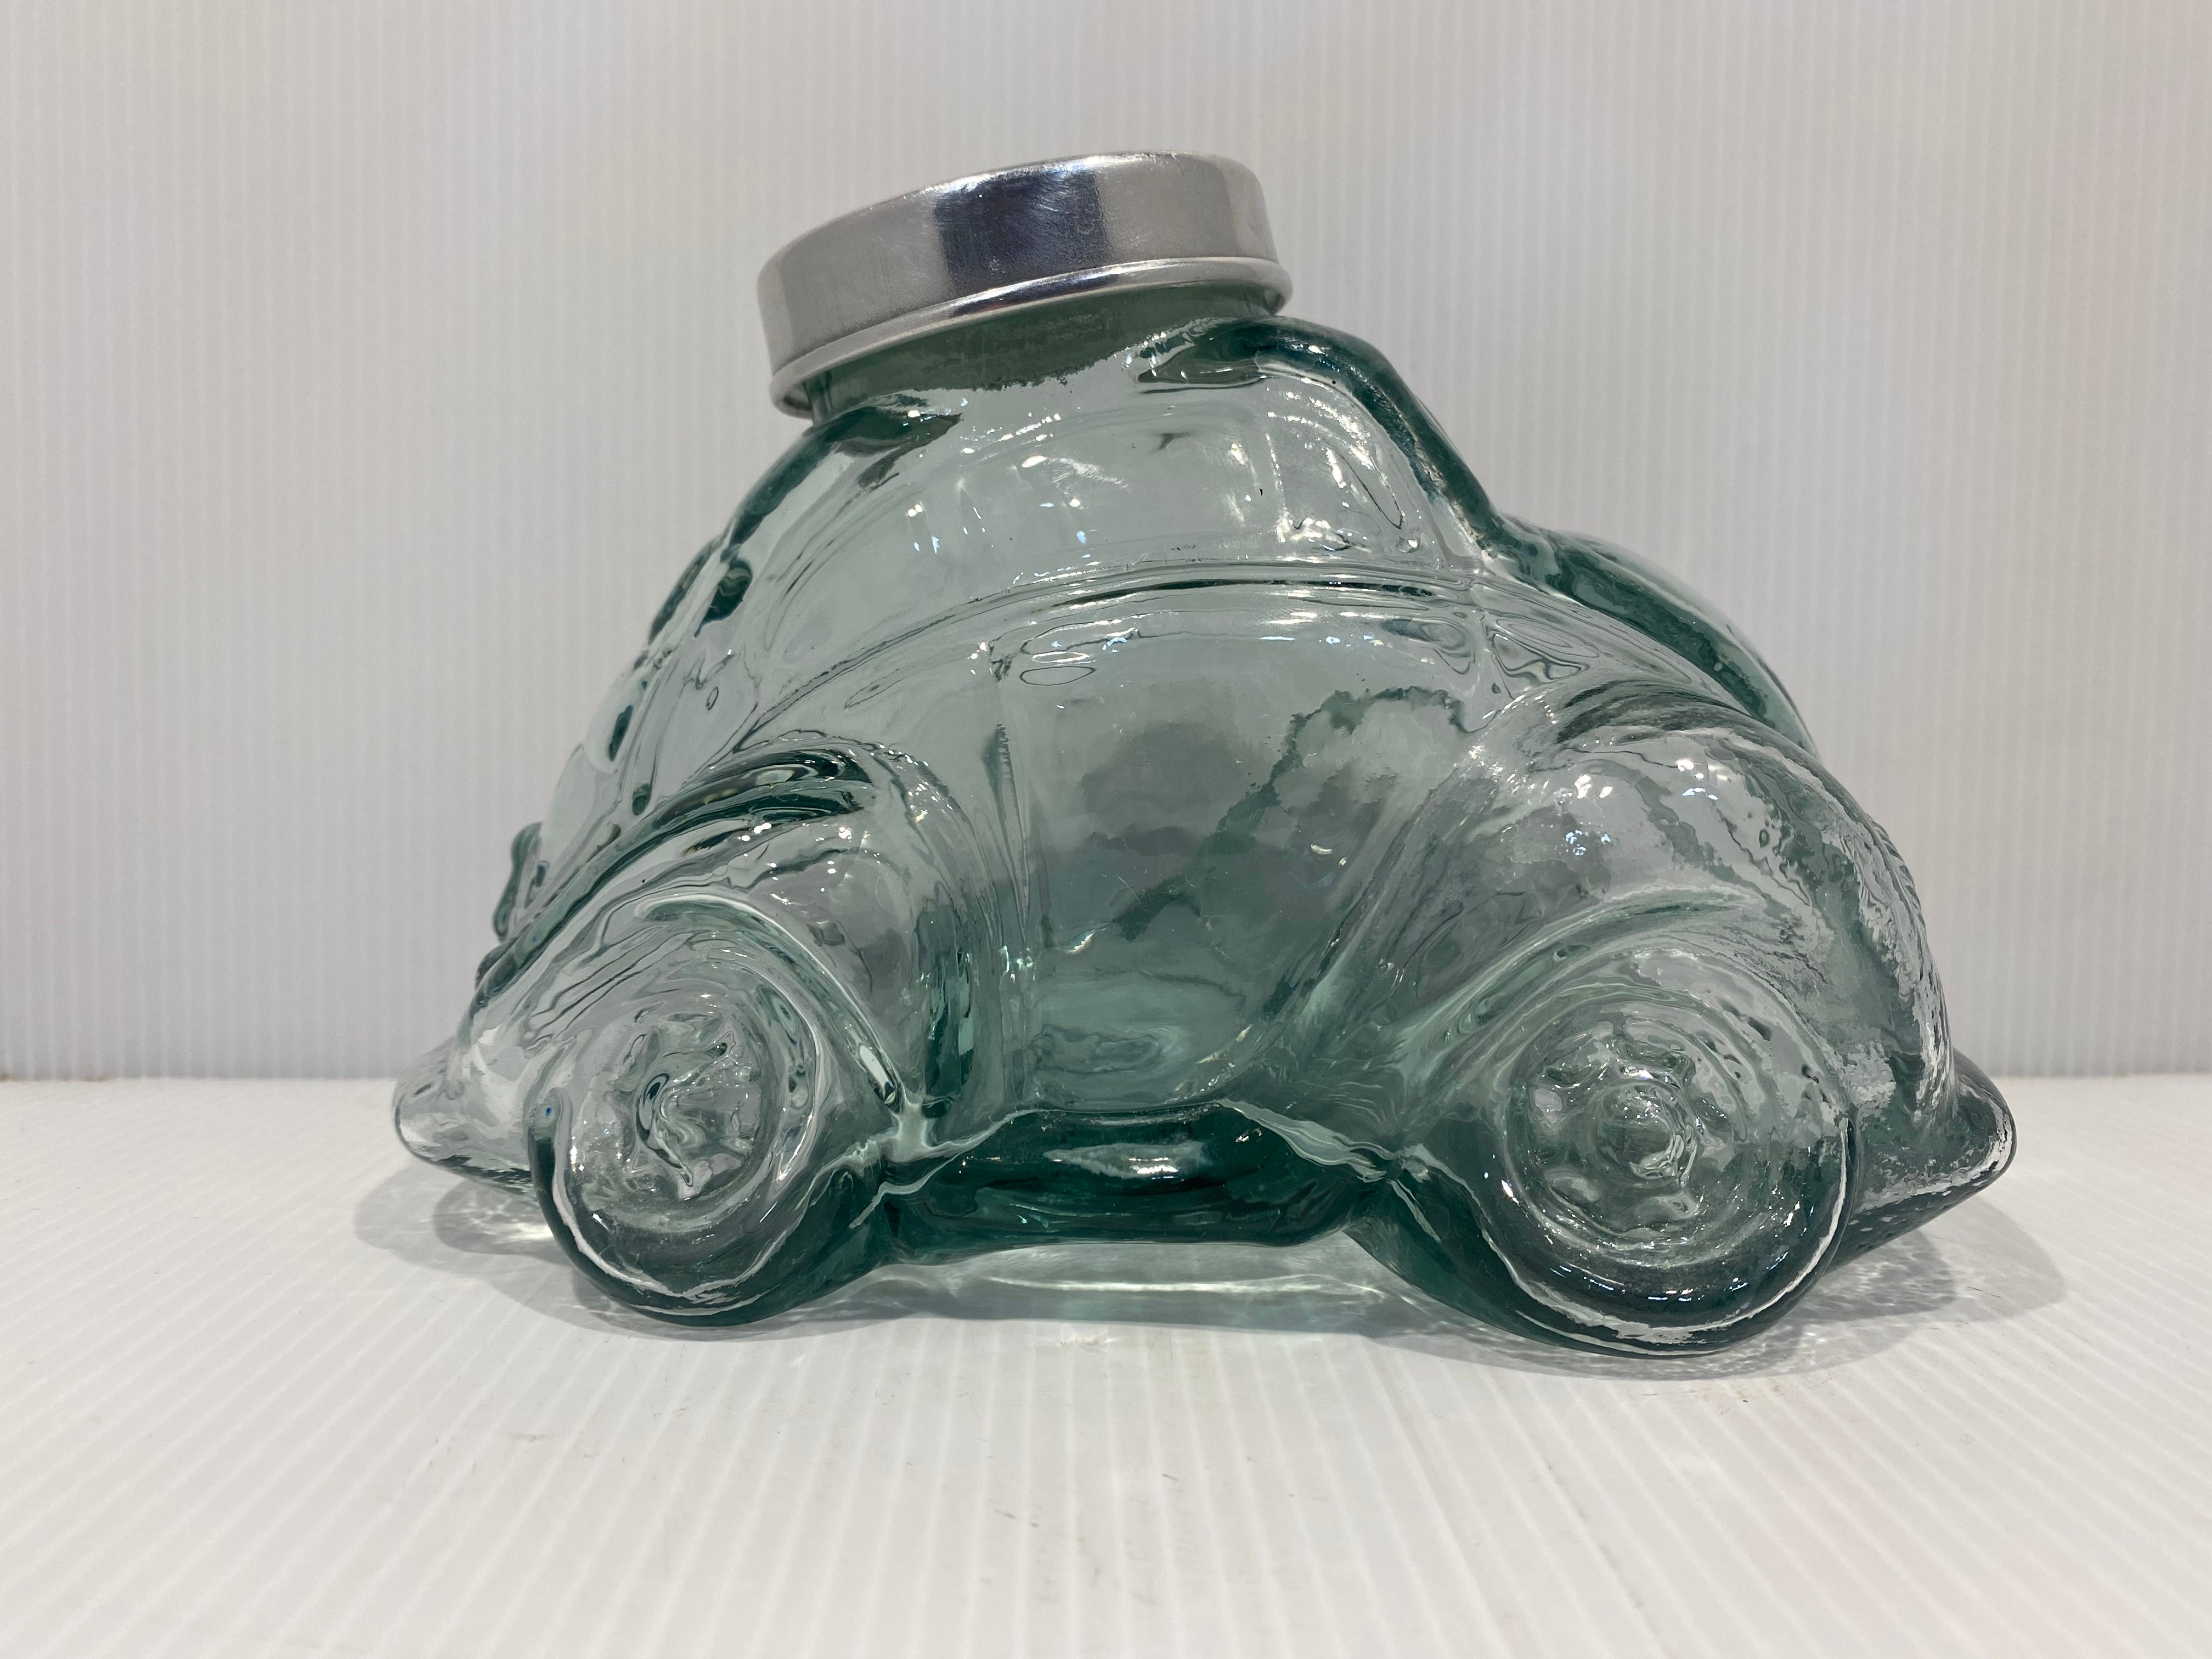 Vintage German Volkswagen glass candy containers. 1960s